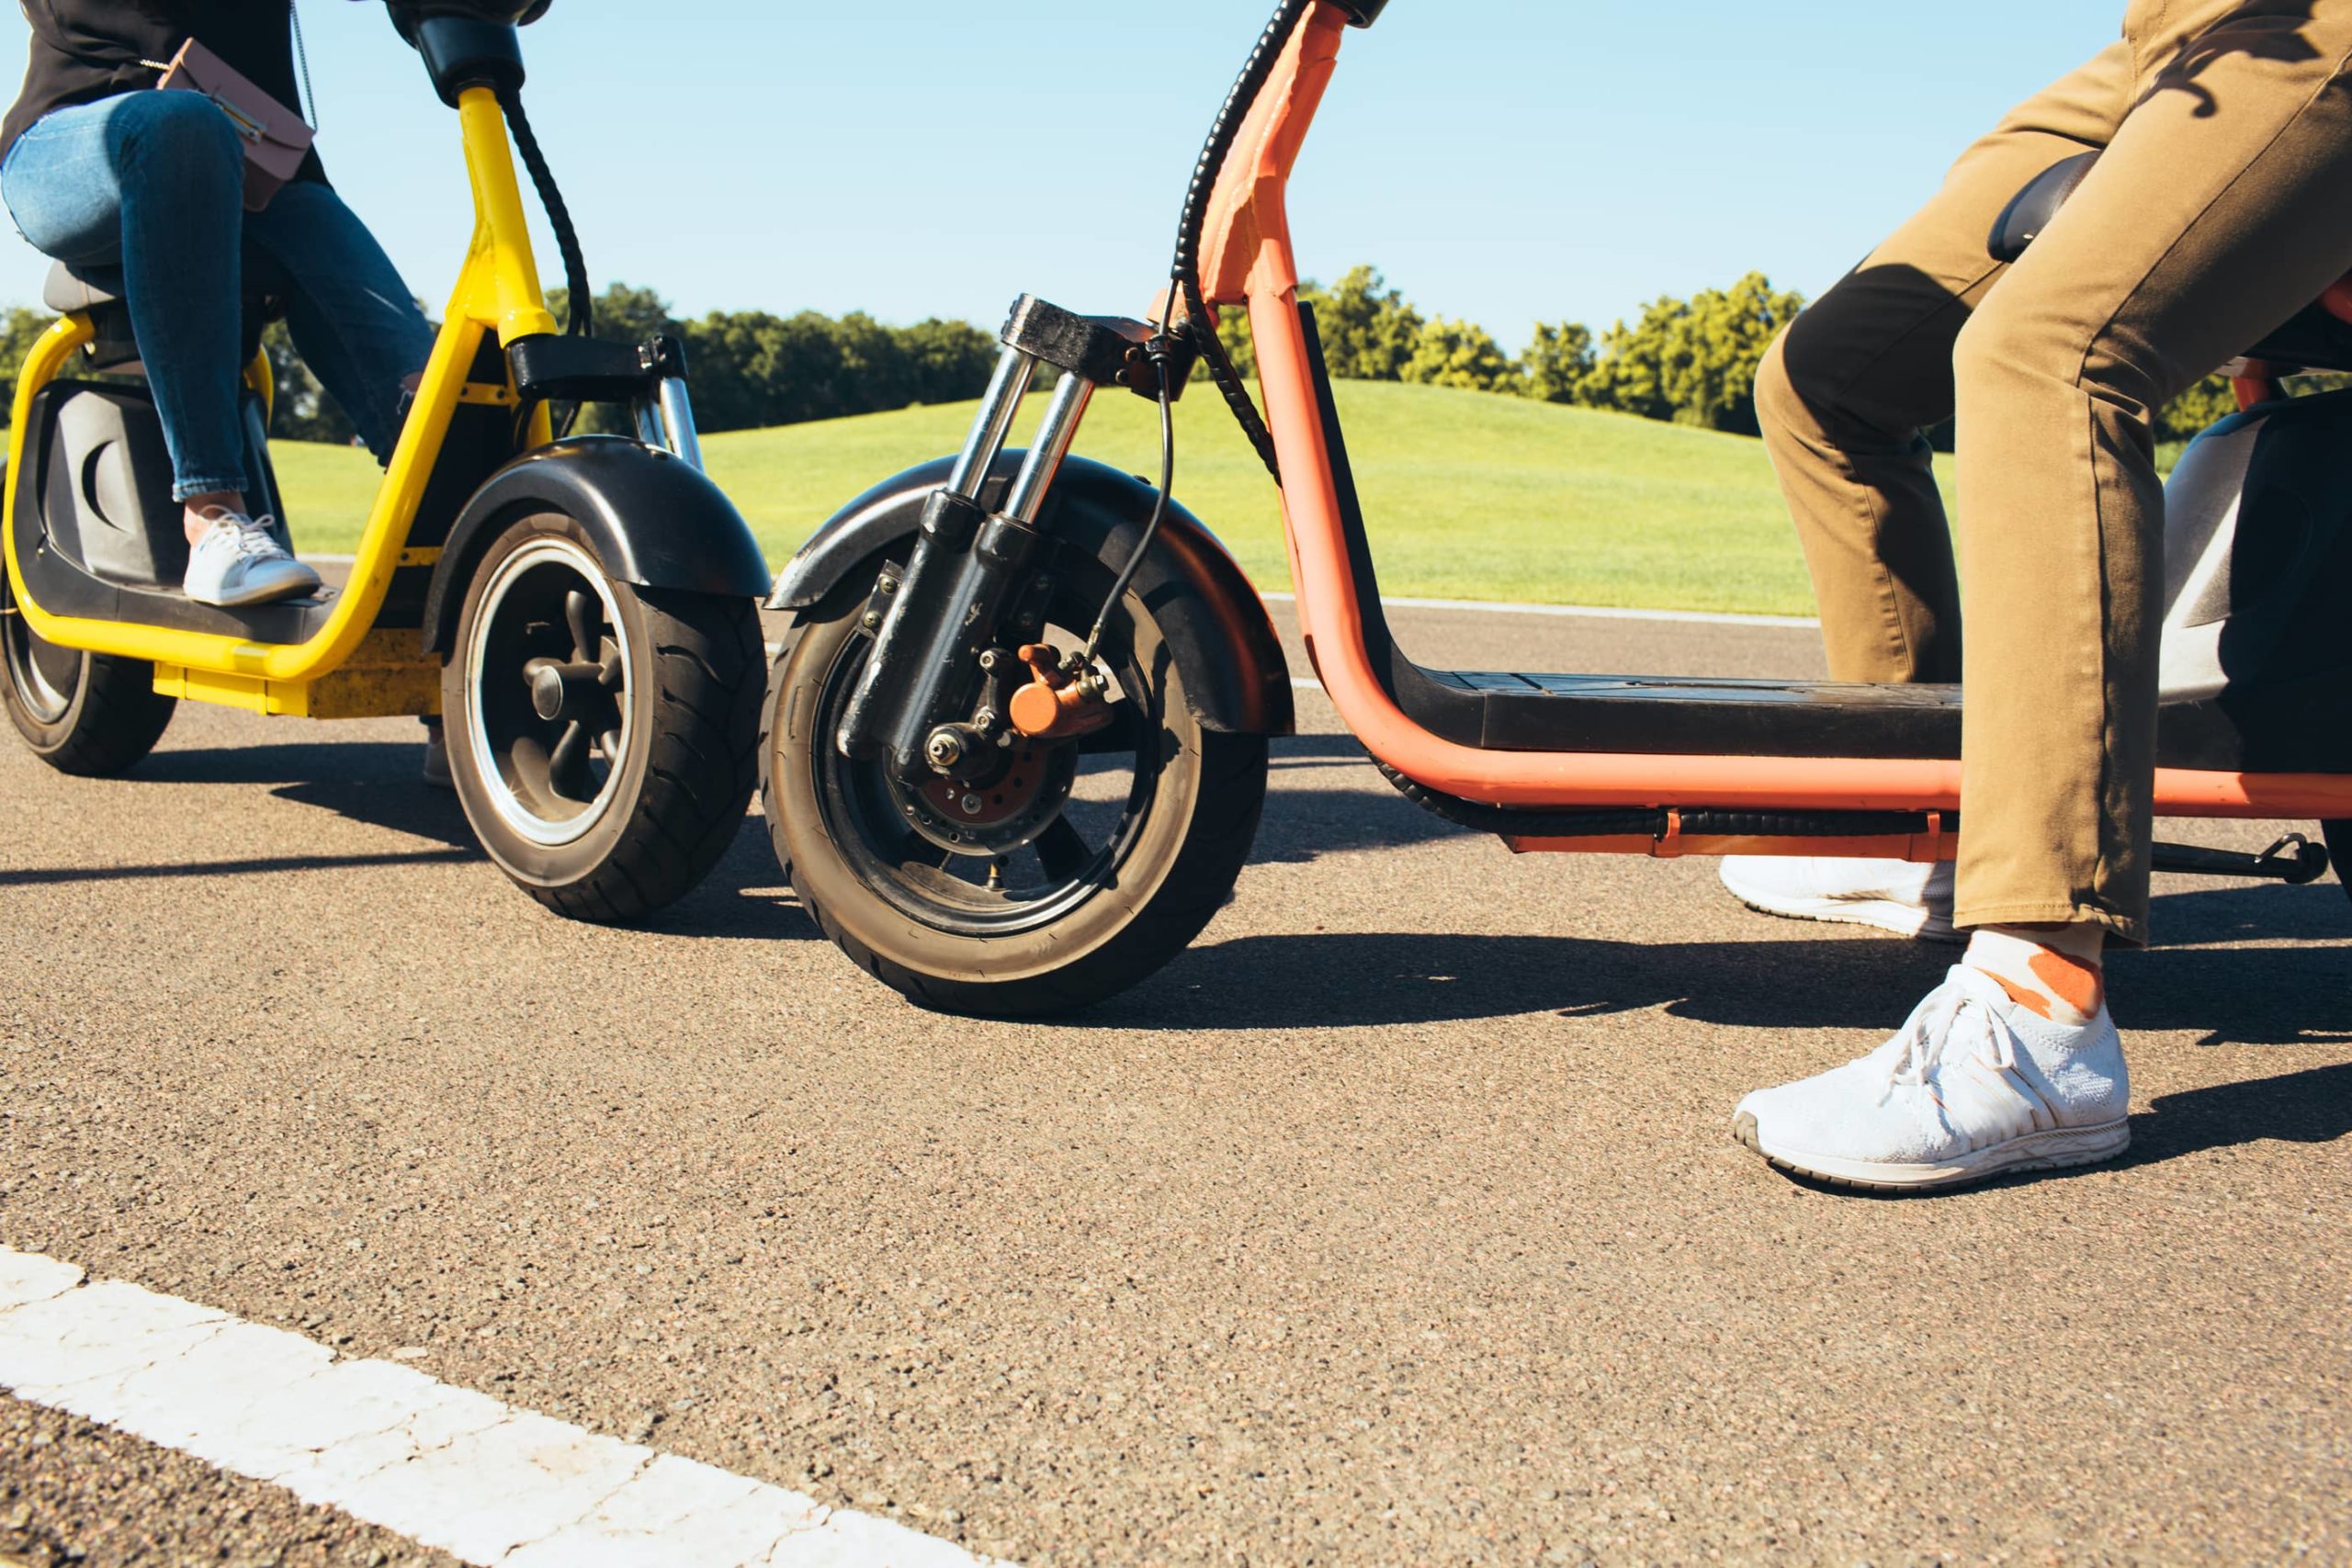 CPSC Releases New Study Showing E-Scooter, Hoverboard Injuries Are on the Rise